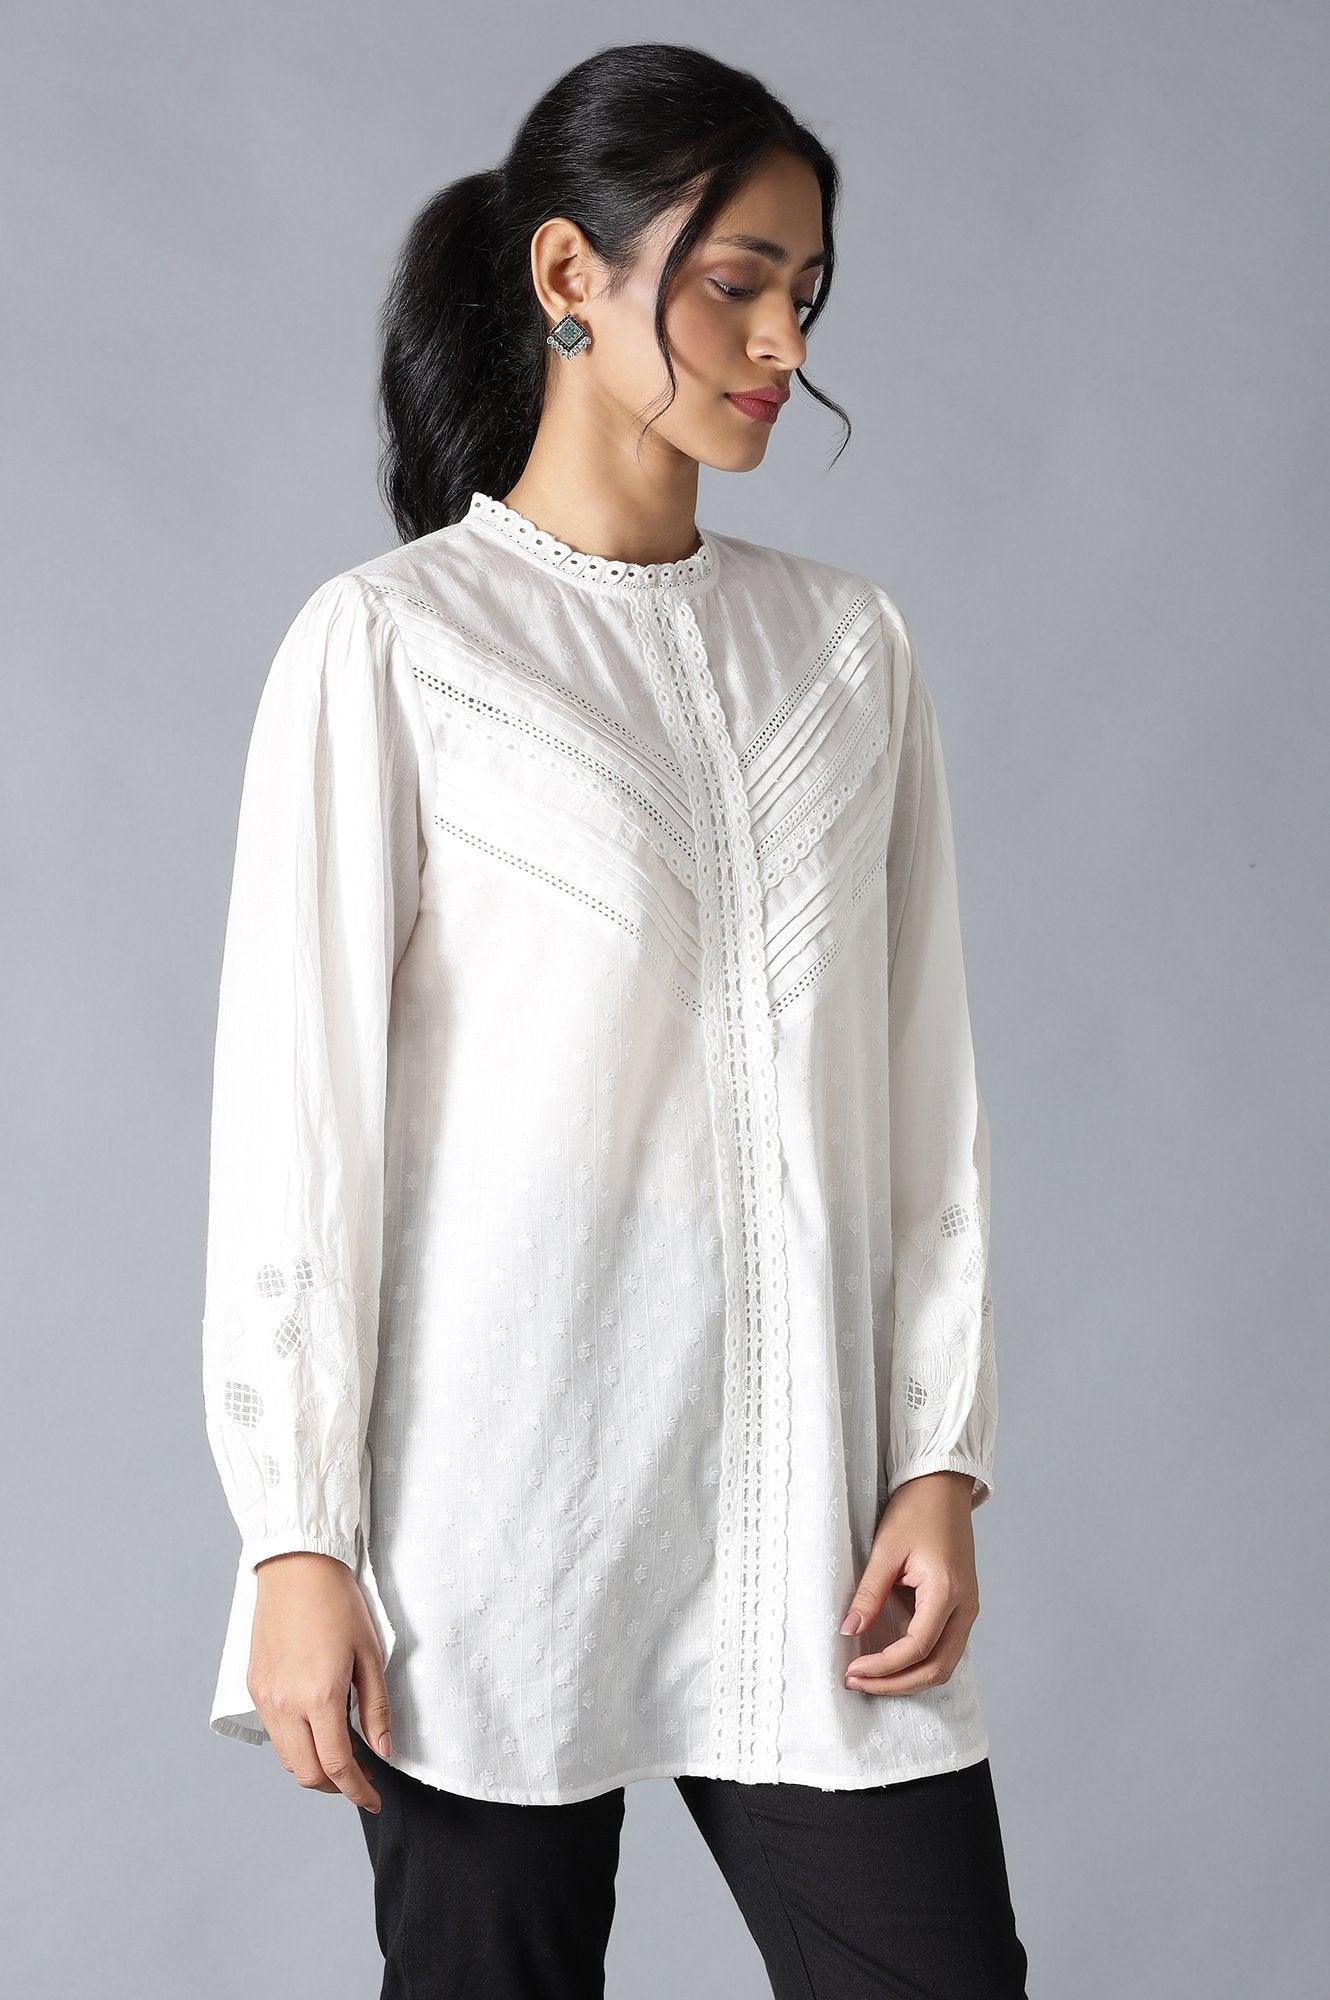 White Top With Lace And Applique Embroidered Sleeves - wforwoman